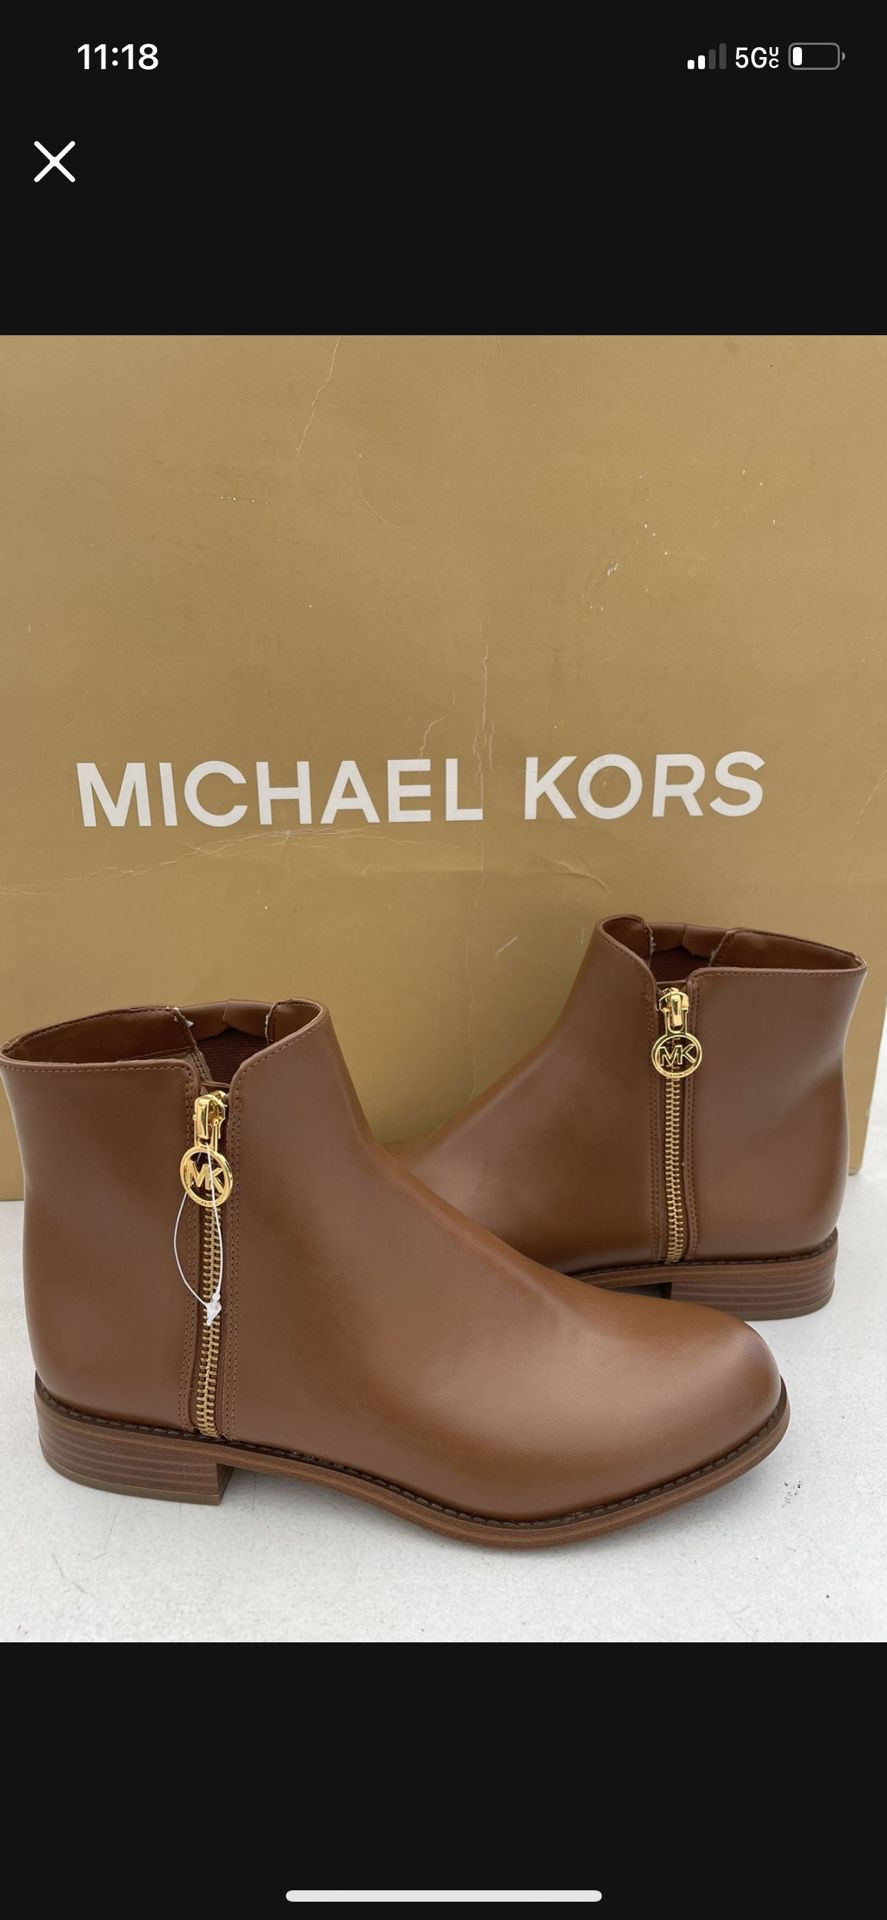 Michael Kors heel ankle boots- Women's - Black/Brown size 8 serious inquiries only  Pick up location in the city of picó Rivera 